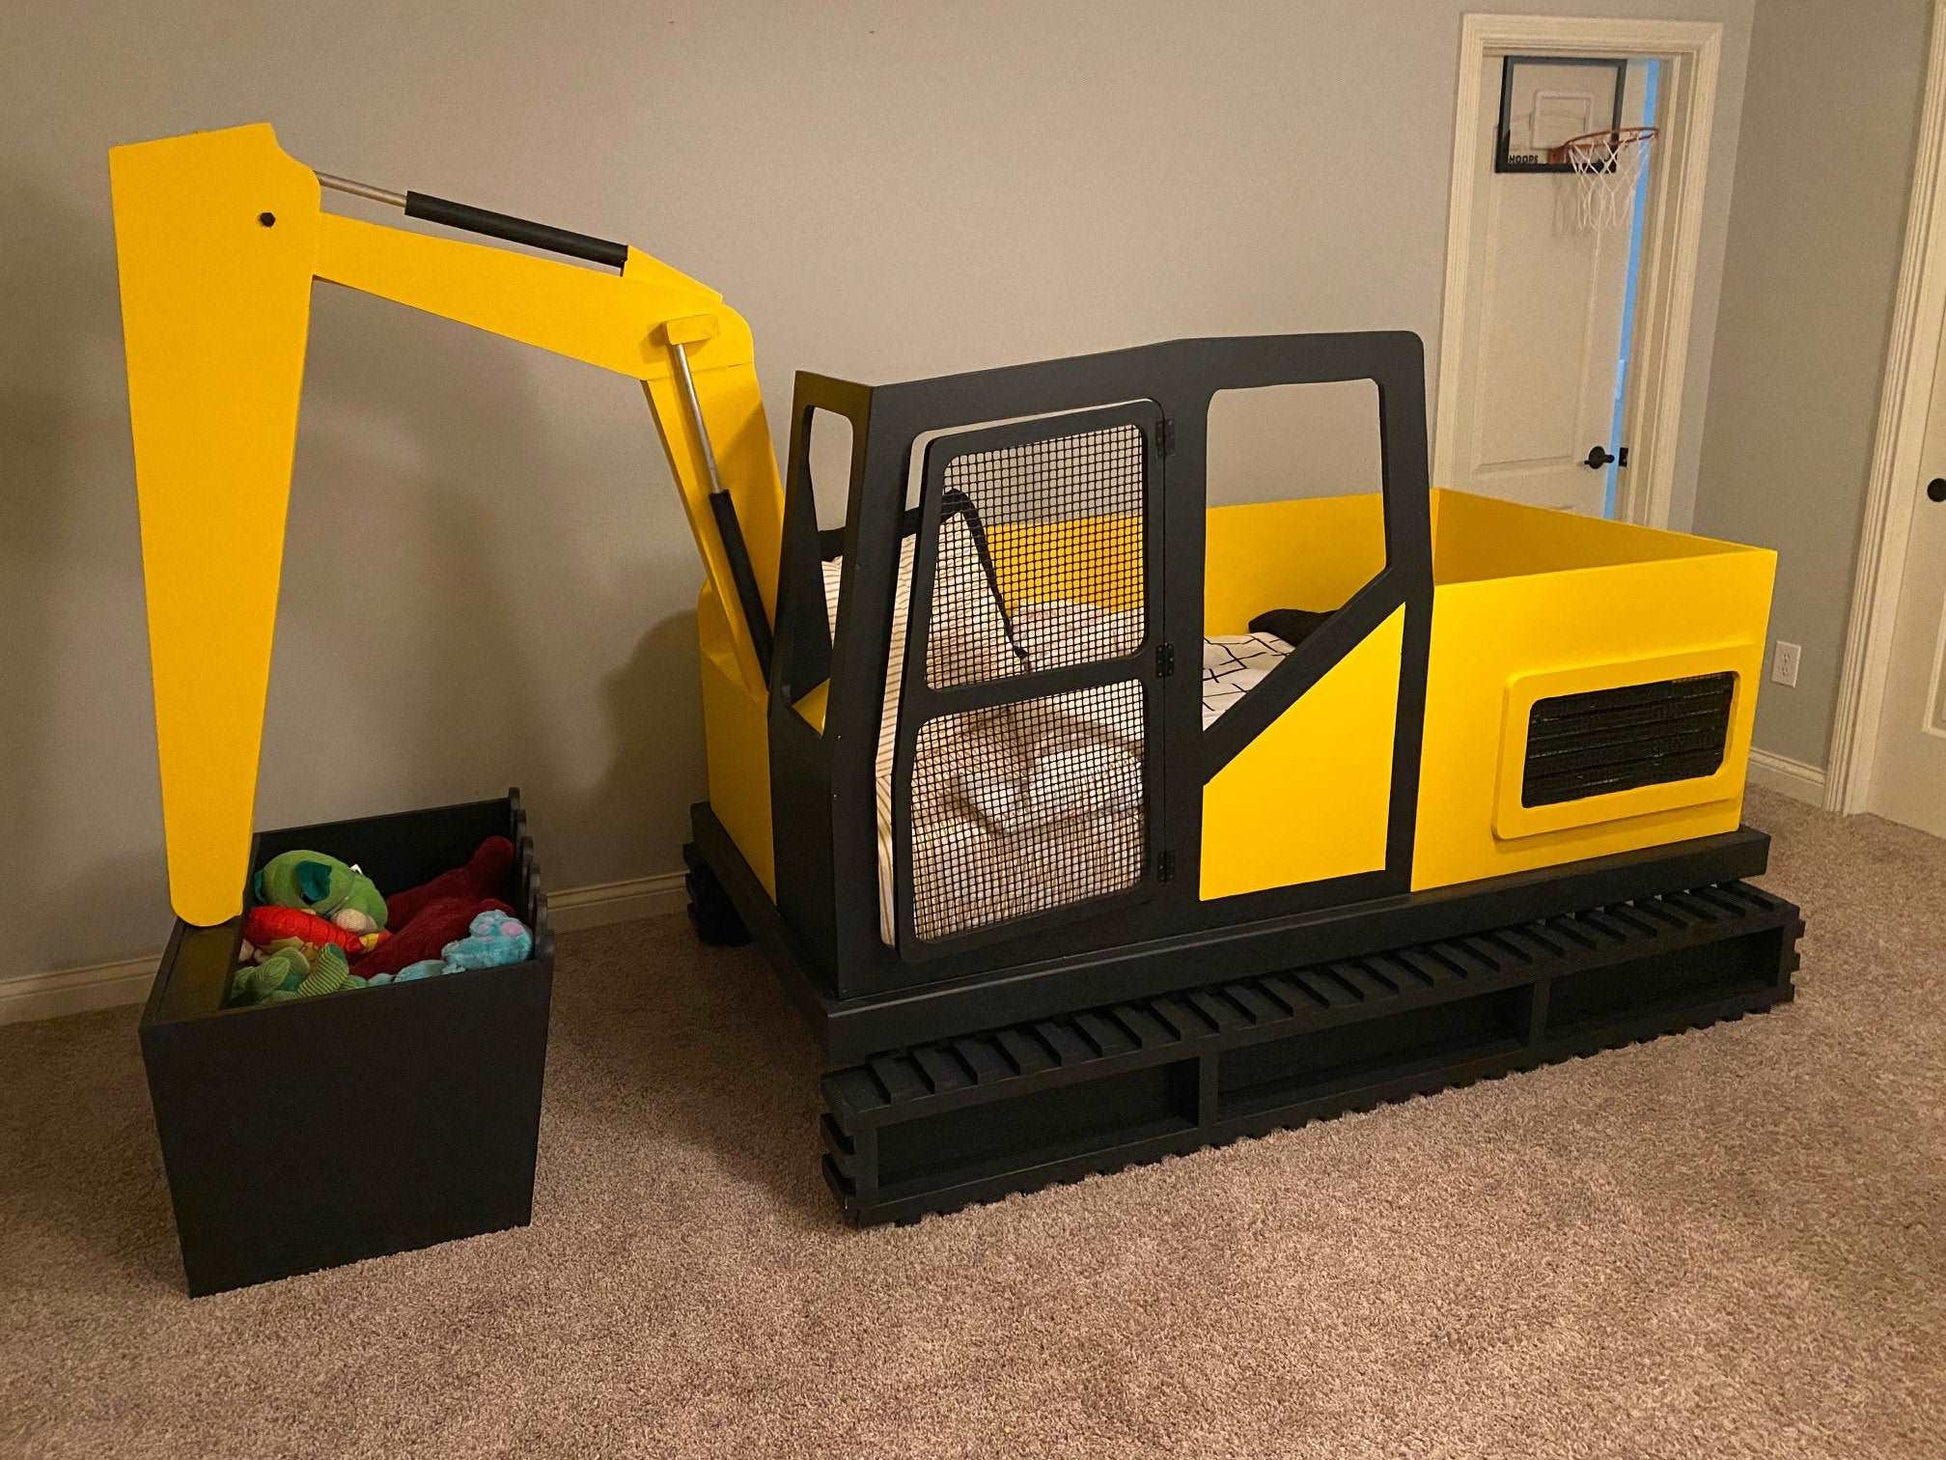 Transform Your Bedroom with Ultimate Full Size Excavator Bed plans – The Perfect Blend of Playfulness and Comfort